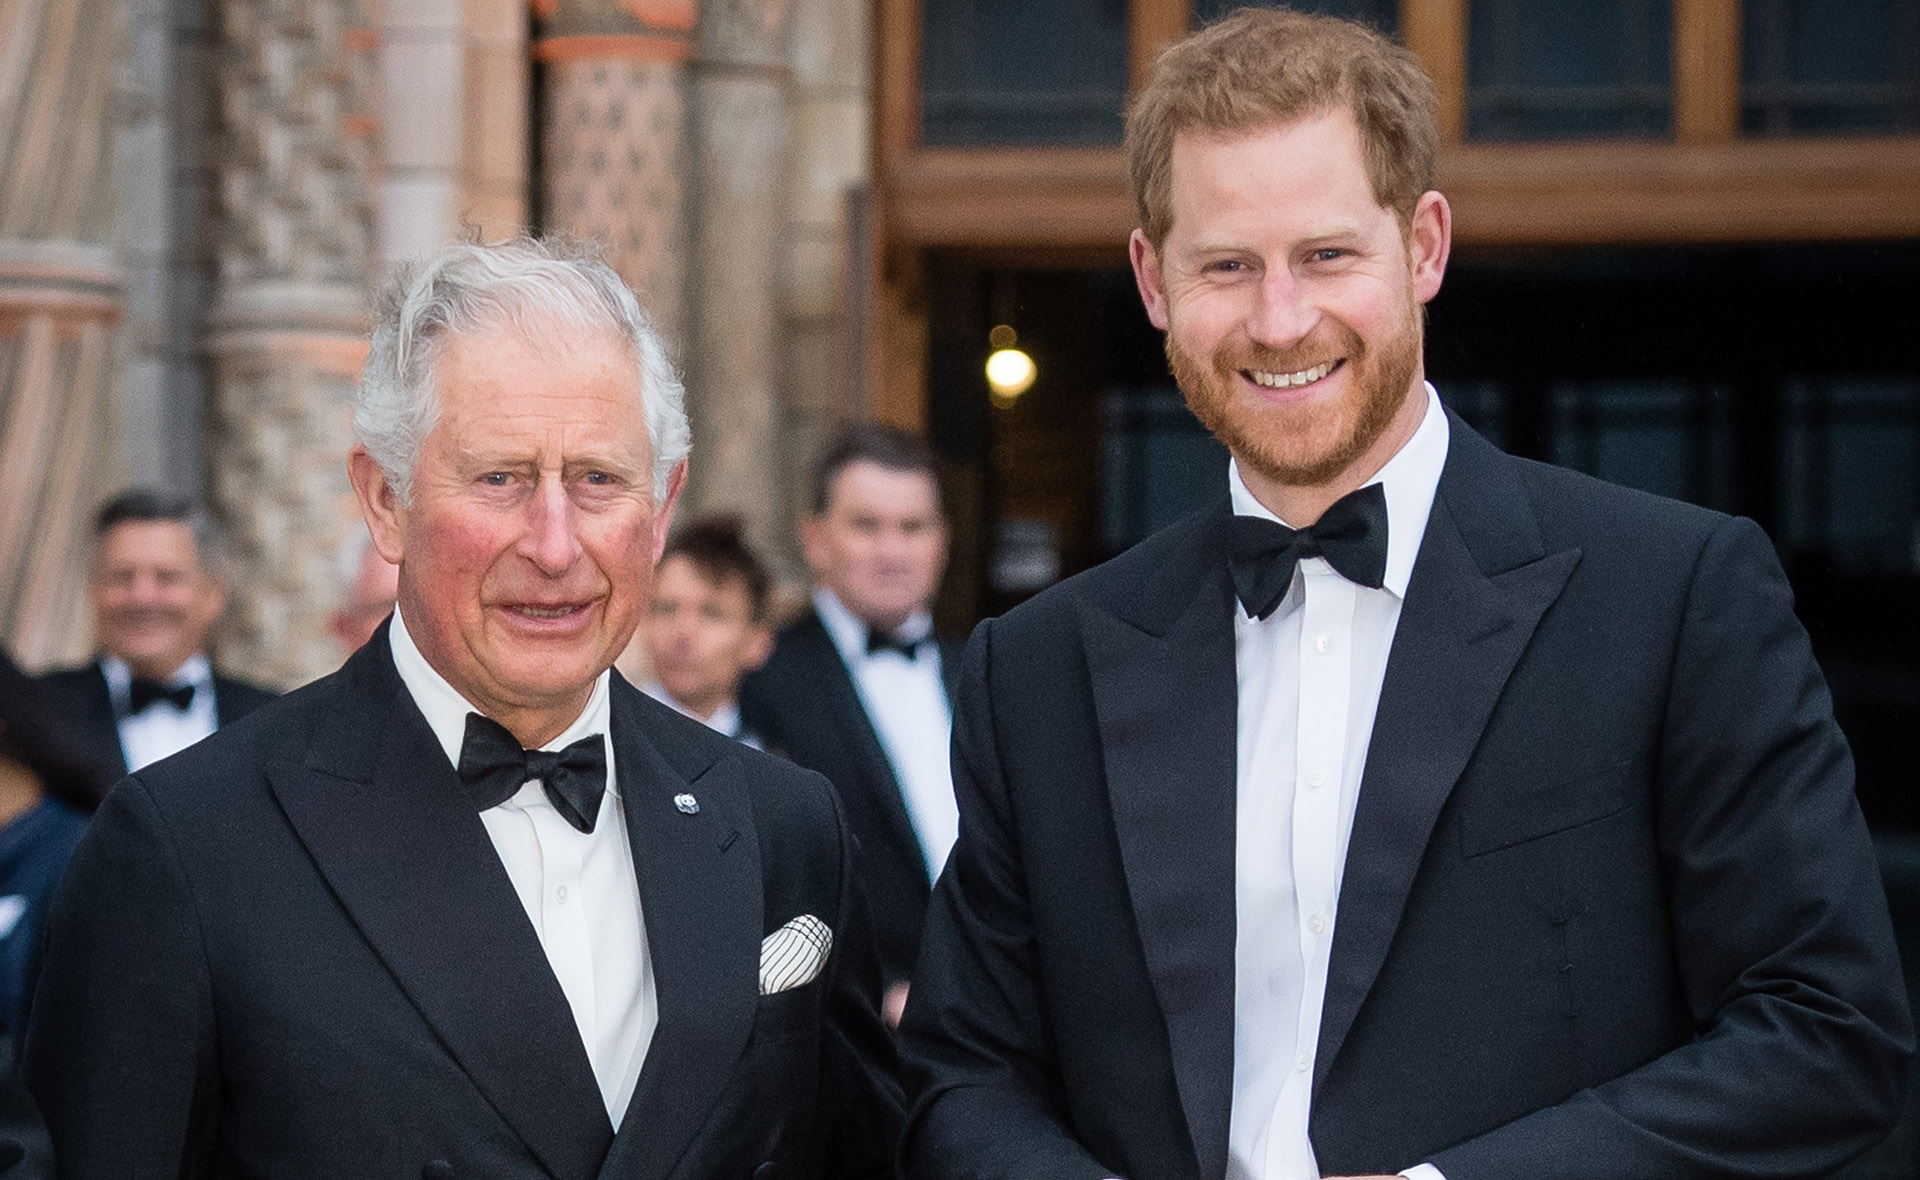 King Charles’ first big change as monarch could push Prince Harry even further out of the royal family